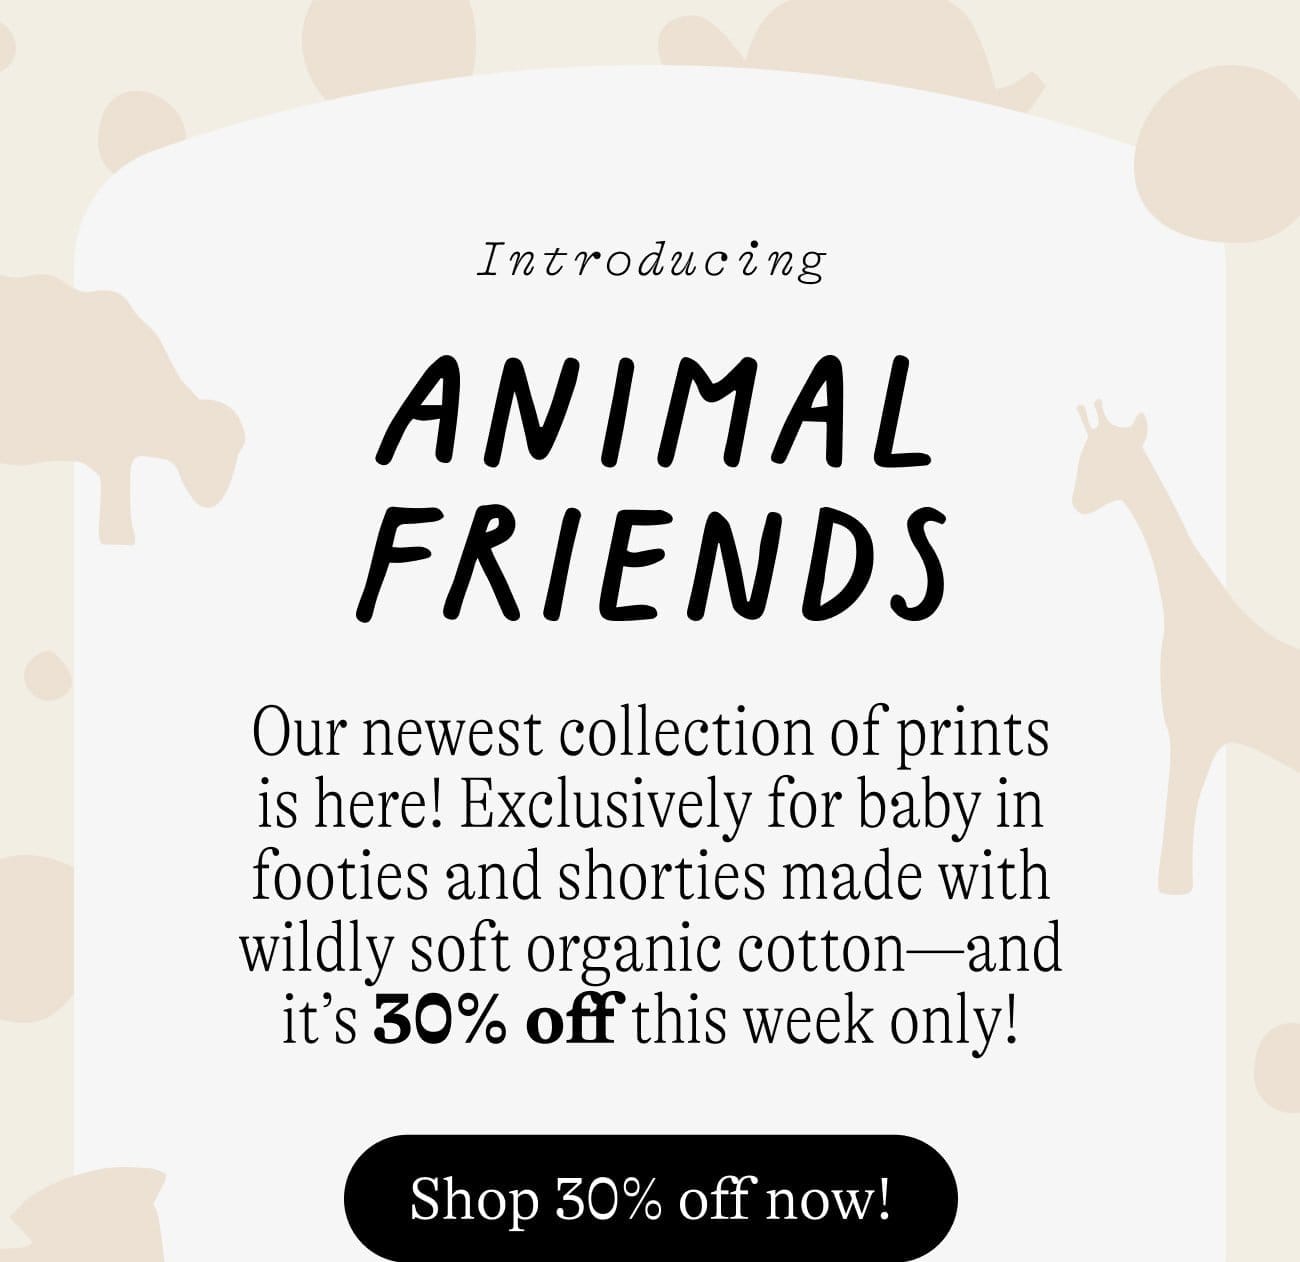 Introducing Animal Friends. Our newest collection of prints is here! Exclusively for baby in footies and shorties made with wildly soft organic cotton—and it’s 30% off this week only! Shop 30% off now!